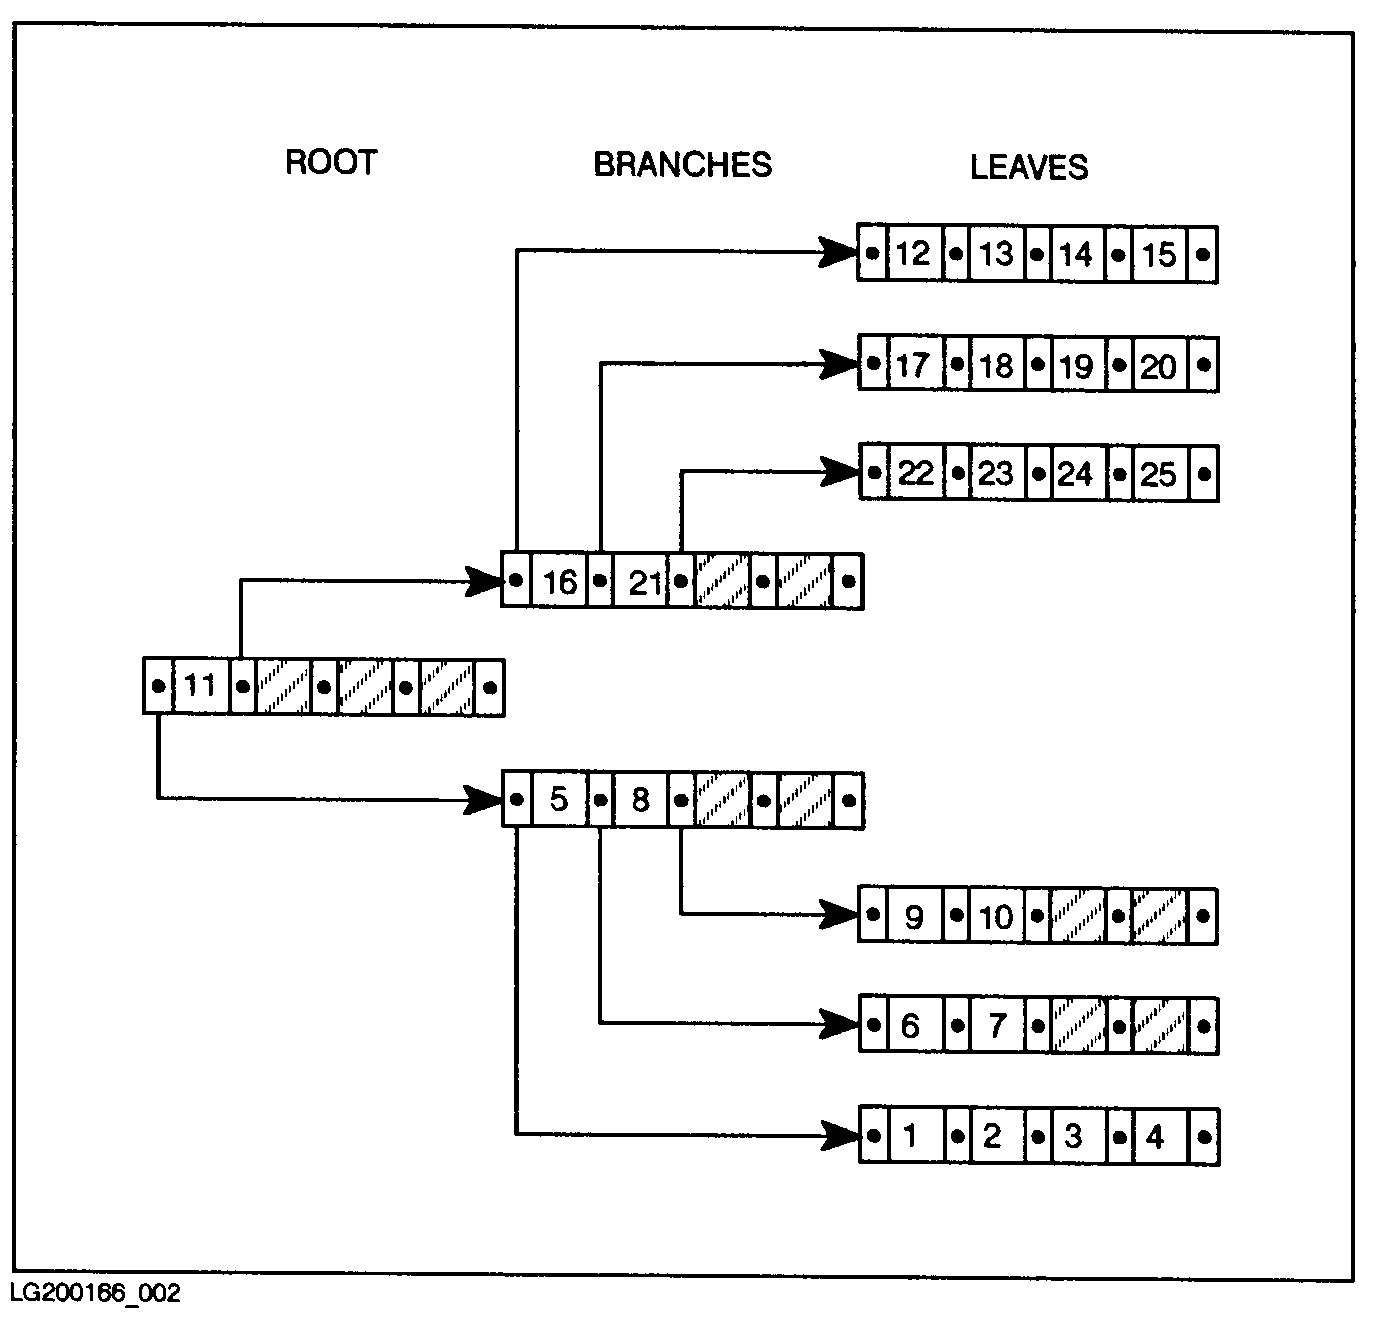 [Simple Index Tree Structure]